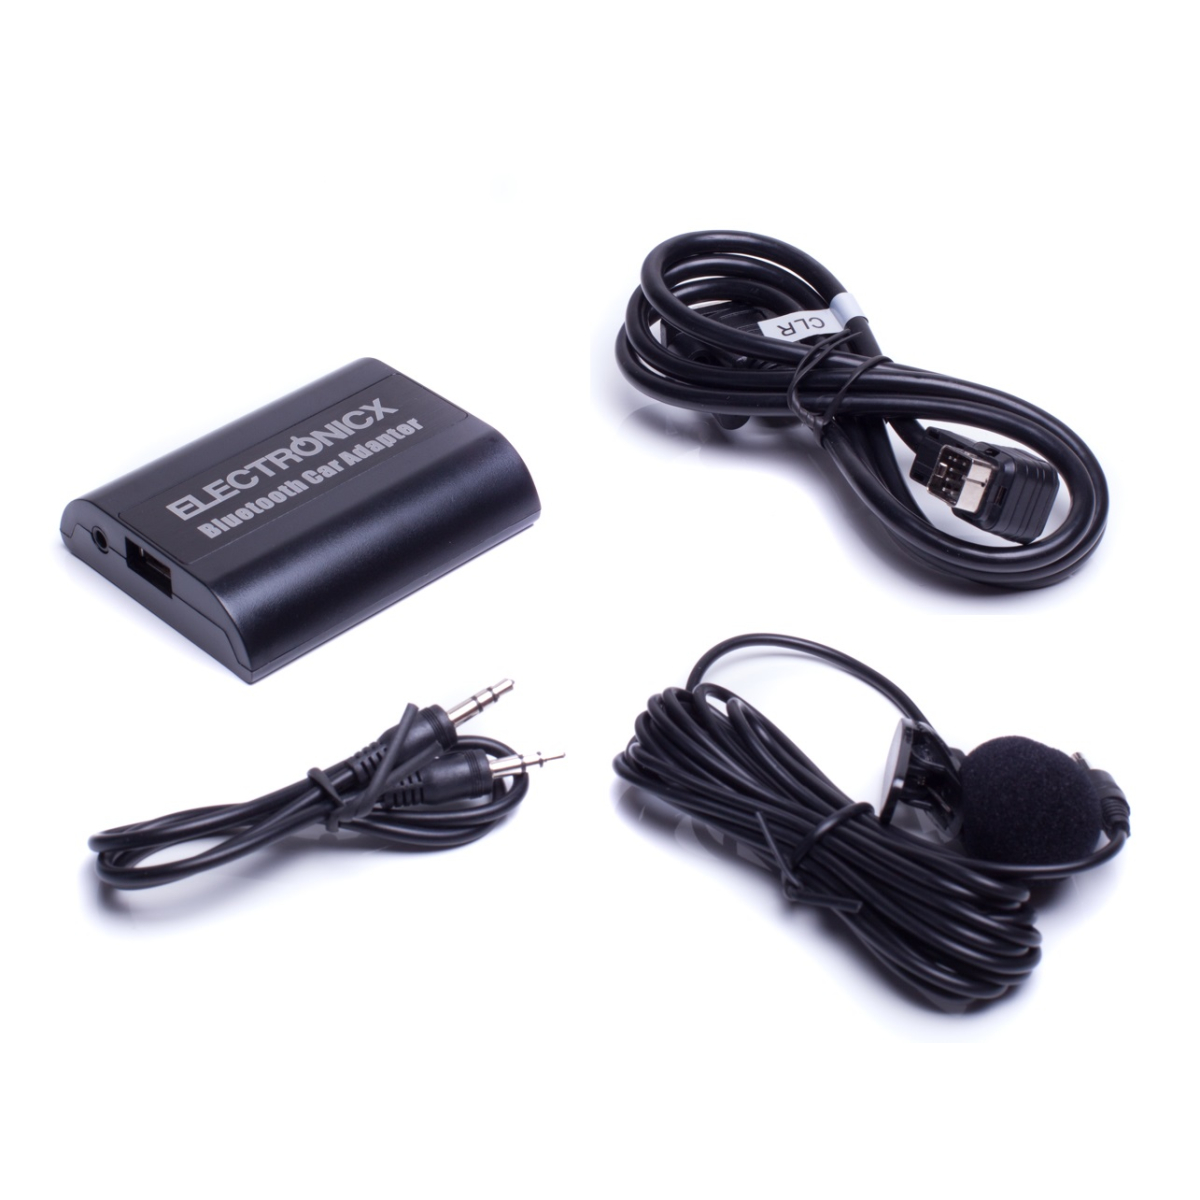 Adapter AUX Bluetooth hands-free kit Clarion